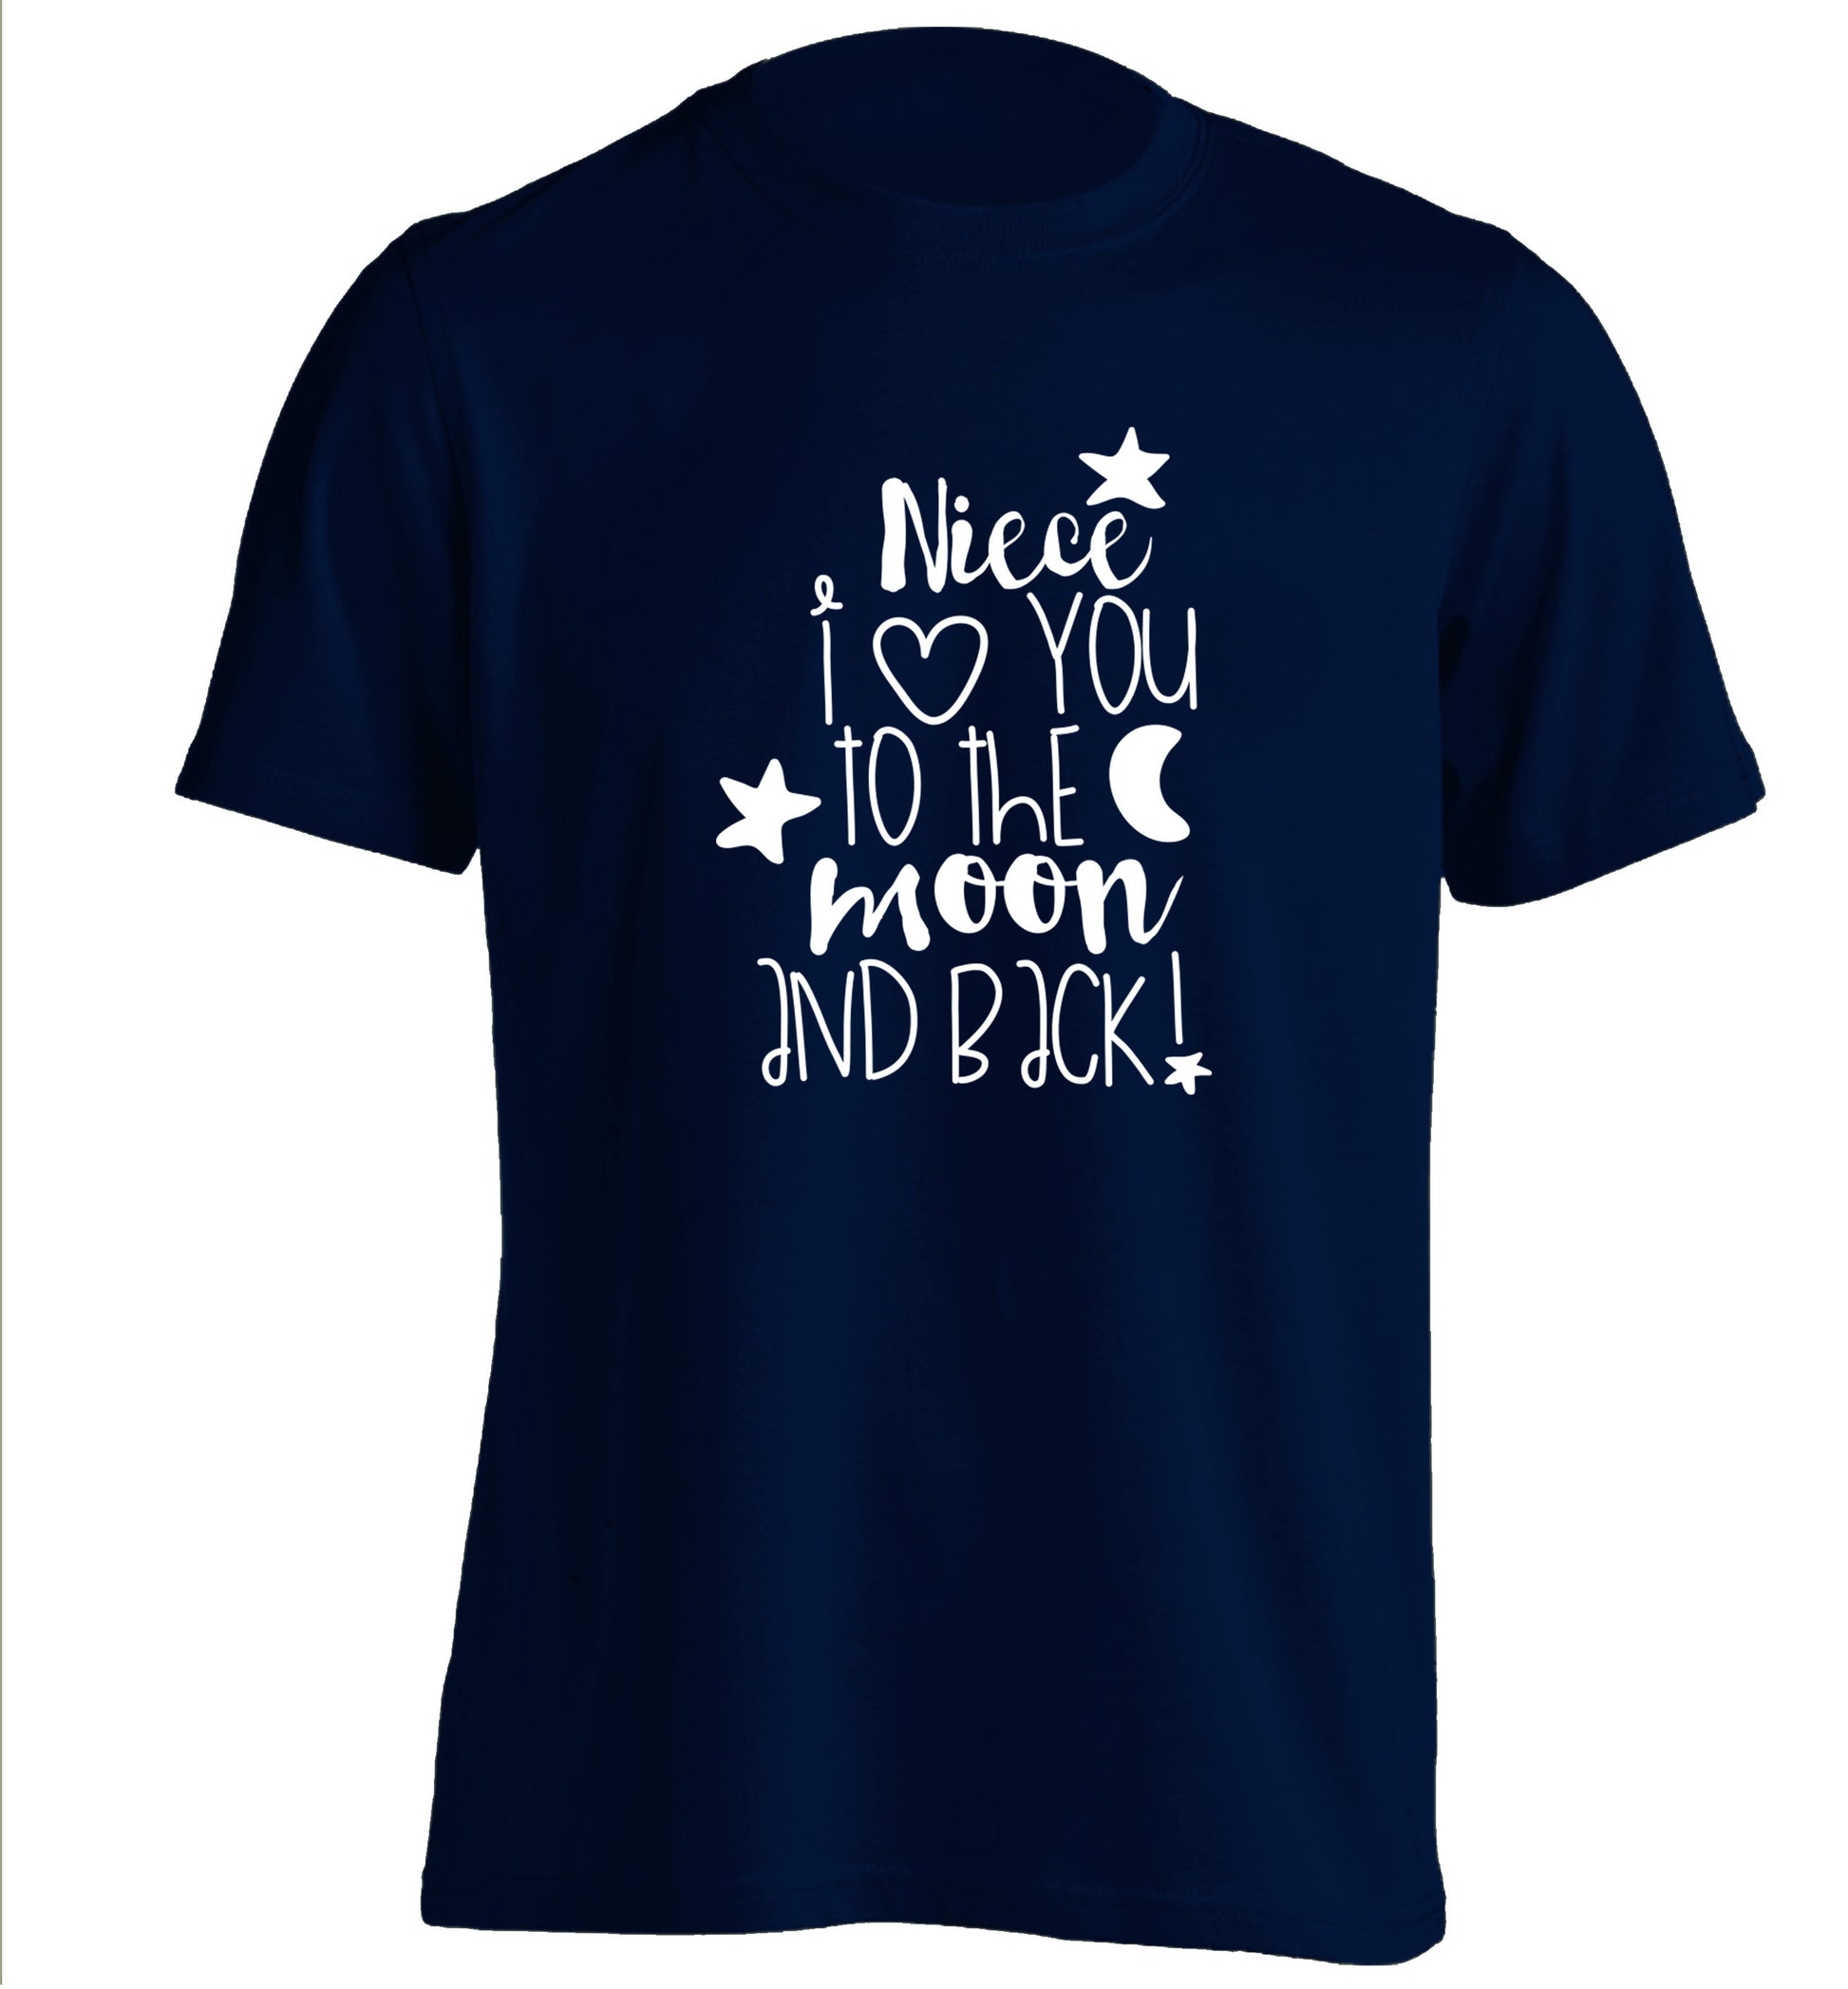 Niece I love you to the moon and back adults unisex navy Tshirt 2XL